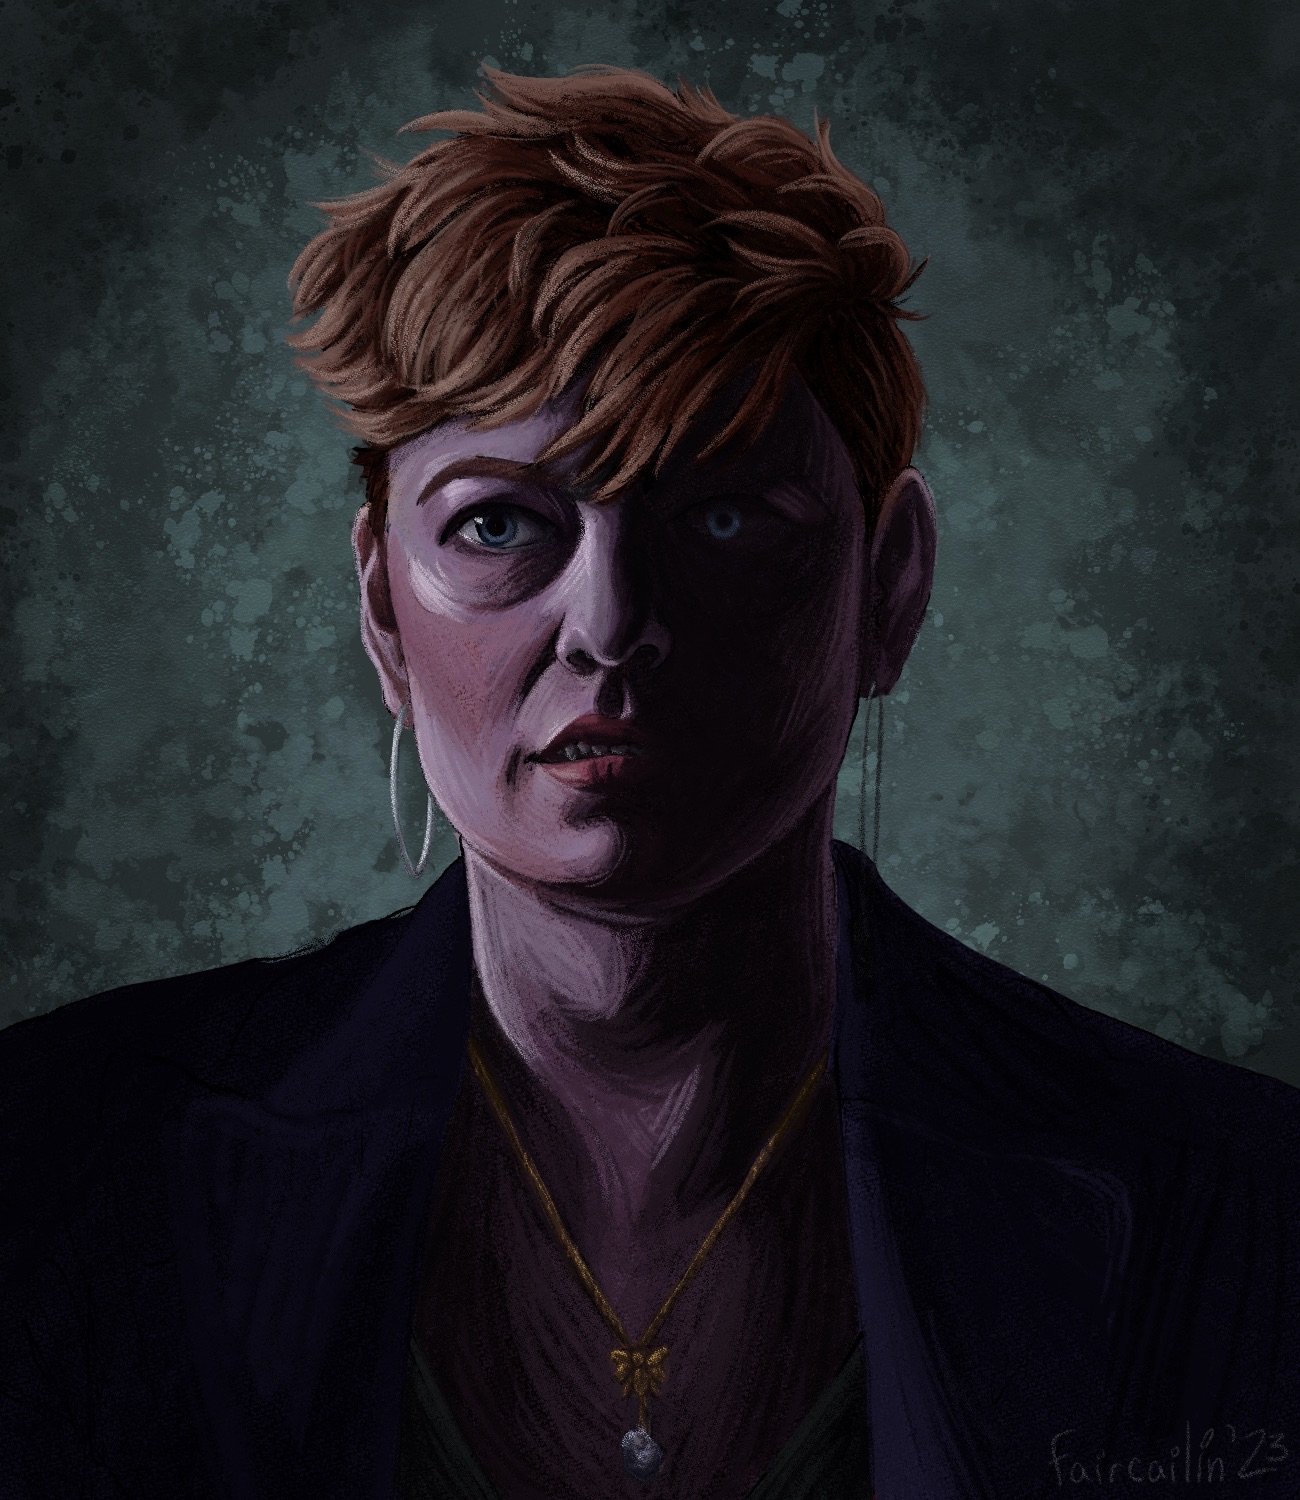 A portrait of Fiona from LA by Night. She's a white, middle aged vampire with short orange hair and blue eyes. Shes wearing gold earrings, a necklace, and a black blazer. Half of her face is in the shadows, but her eyes glow through the darkness.